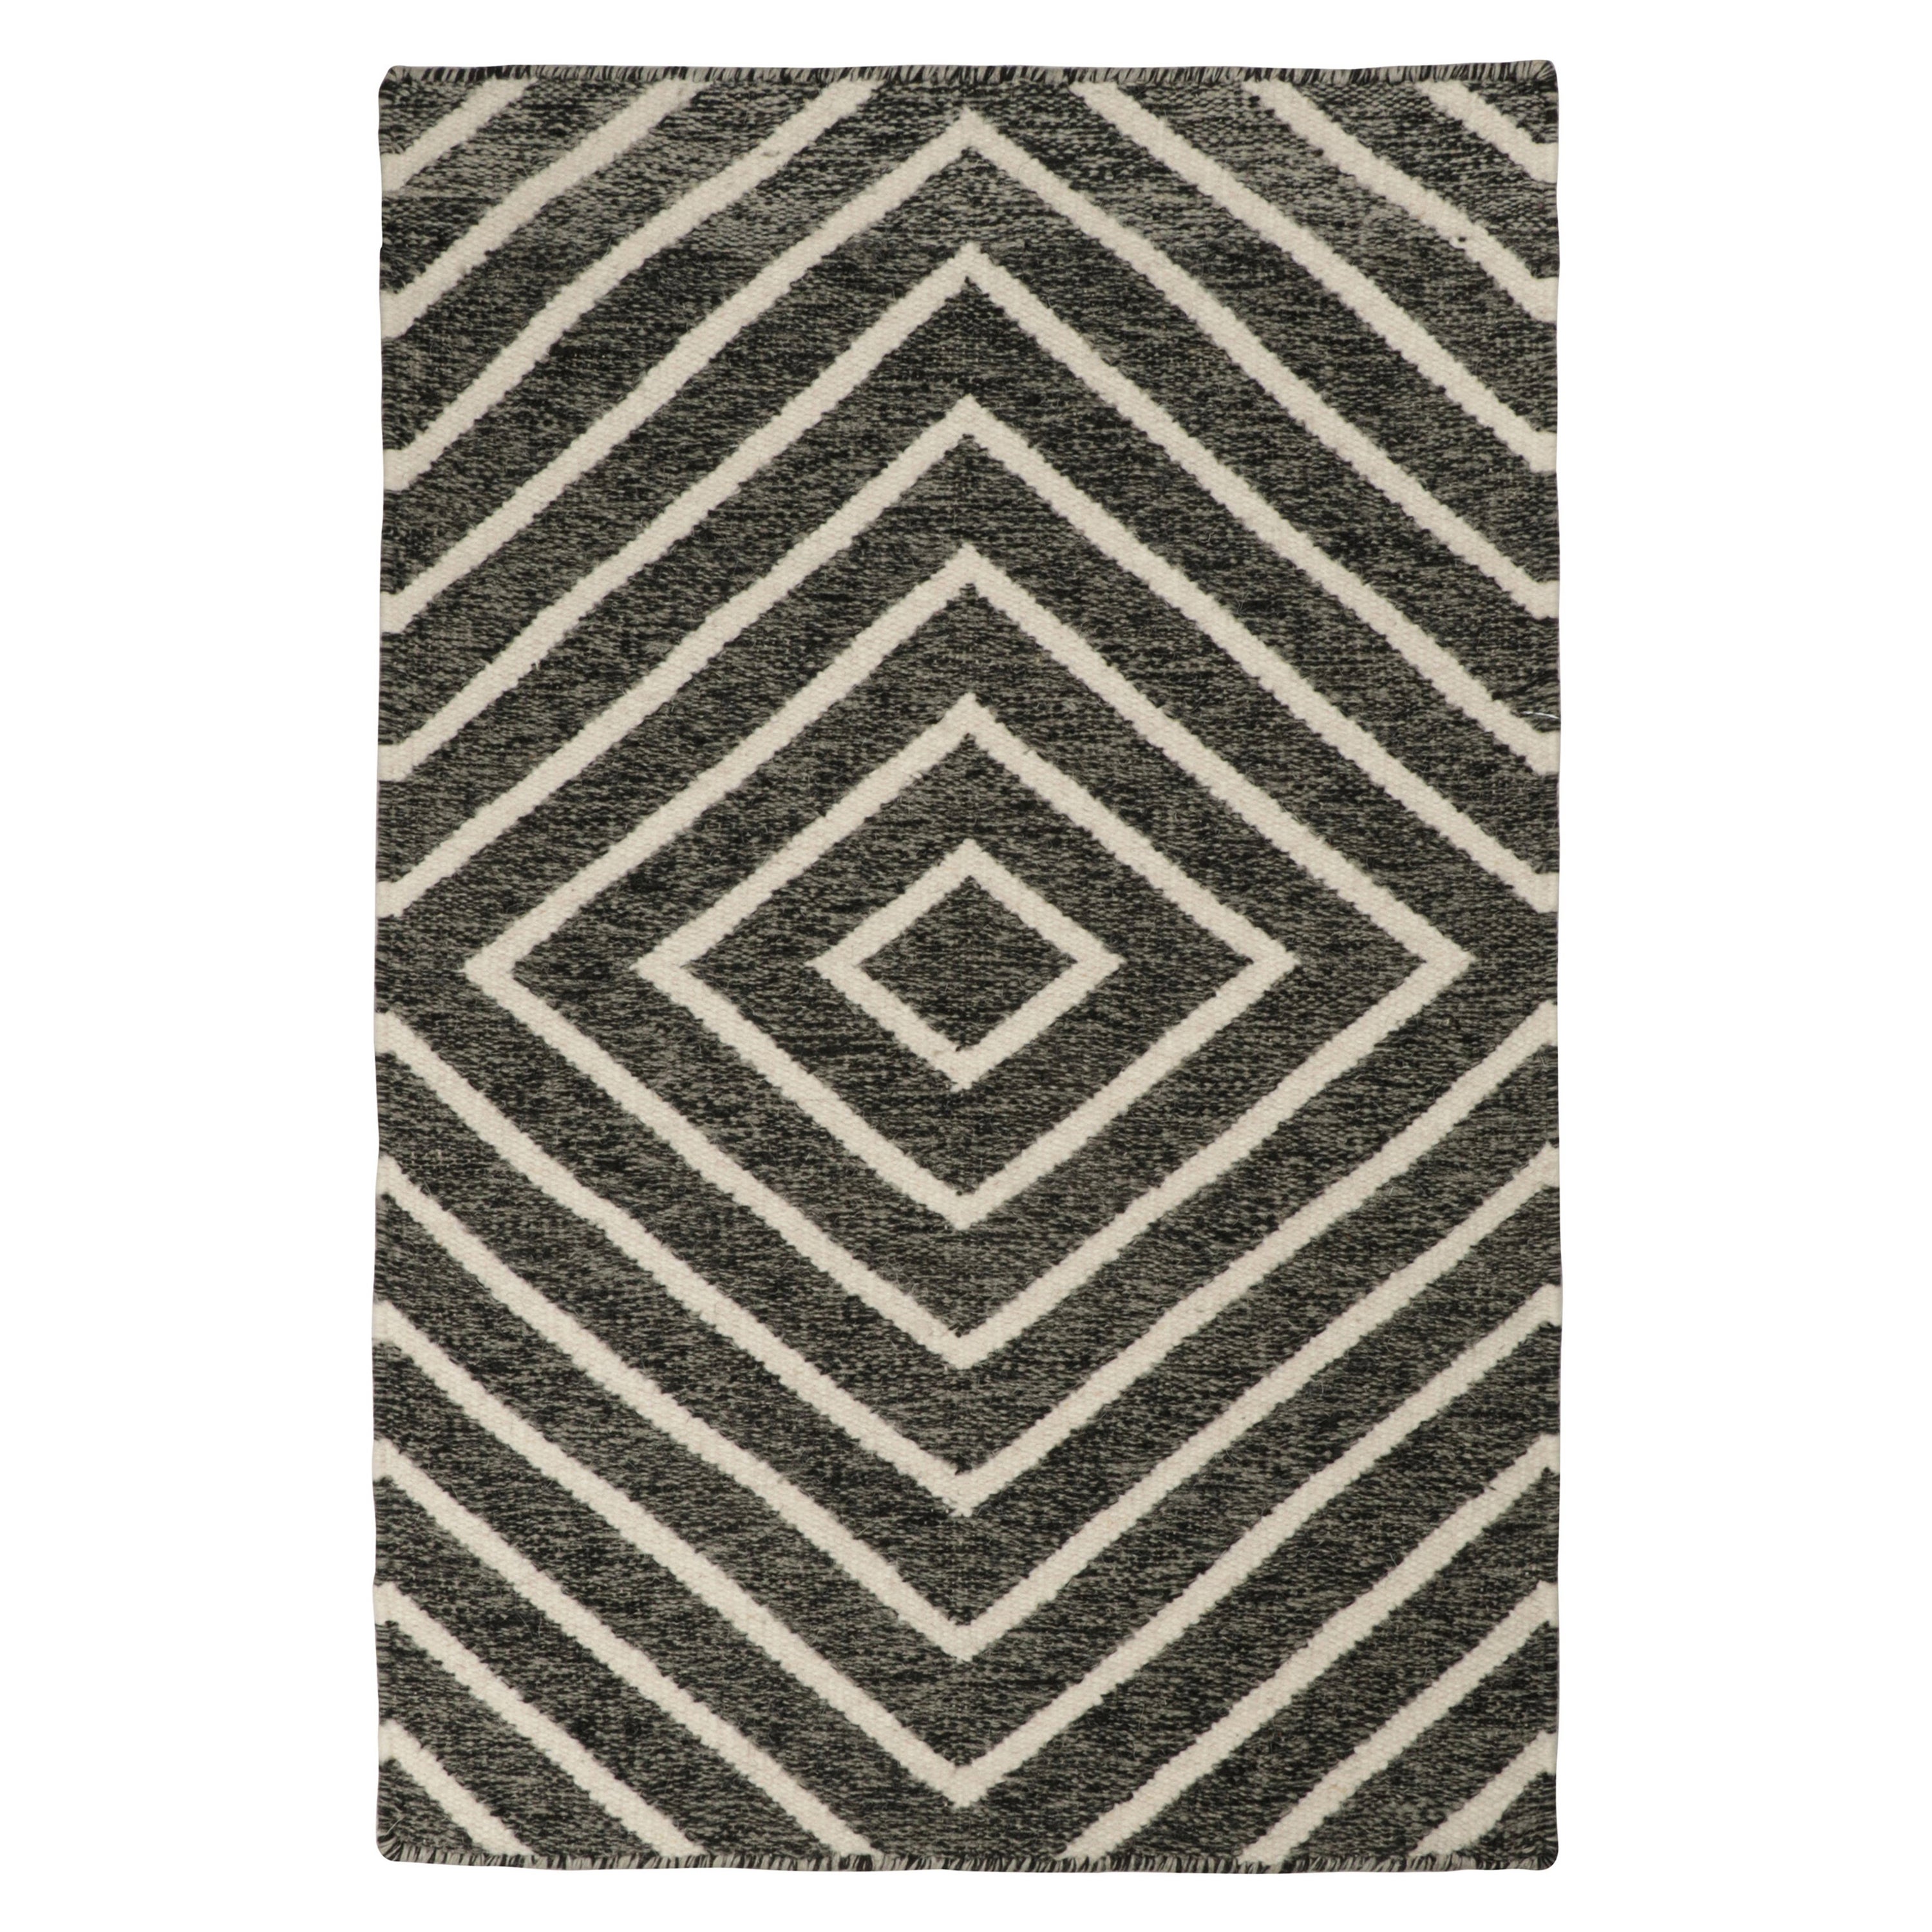 Rug & Kilim’s Modern Kilim Accent Rug in Gray with White Diamond Patterns